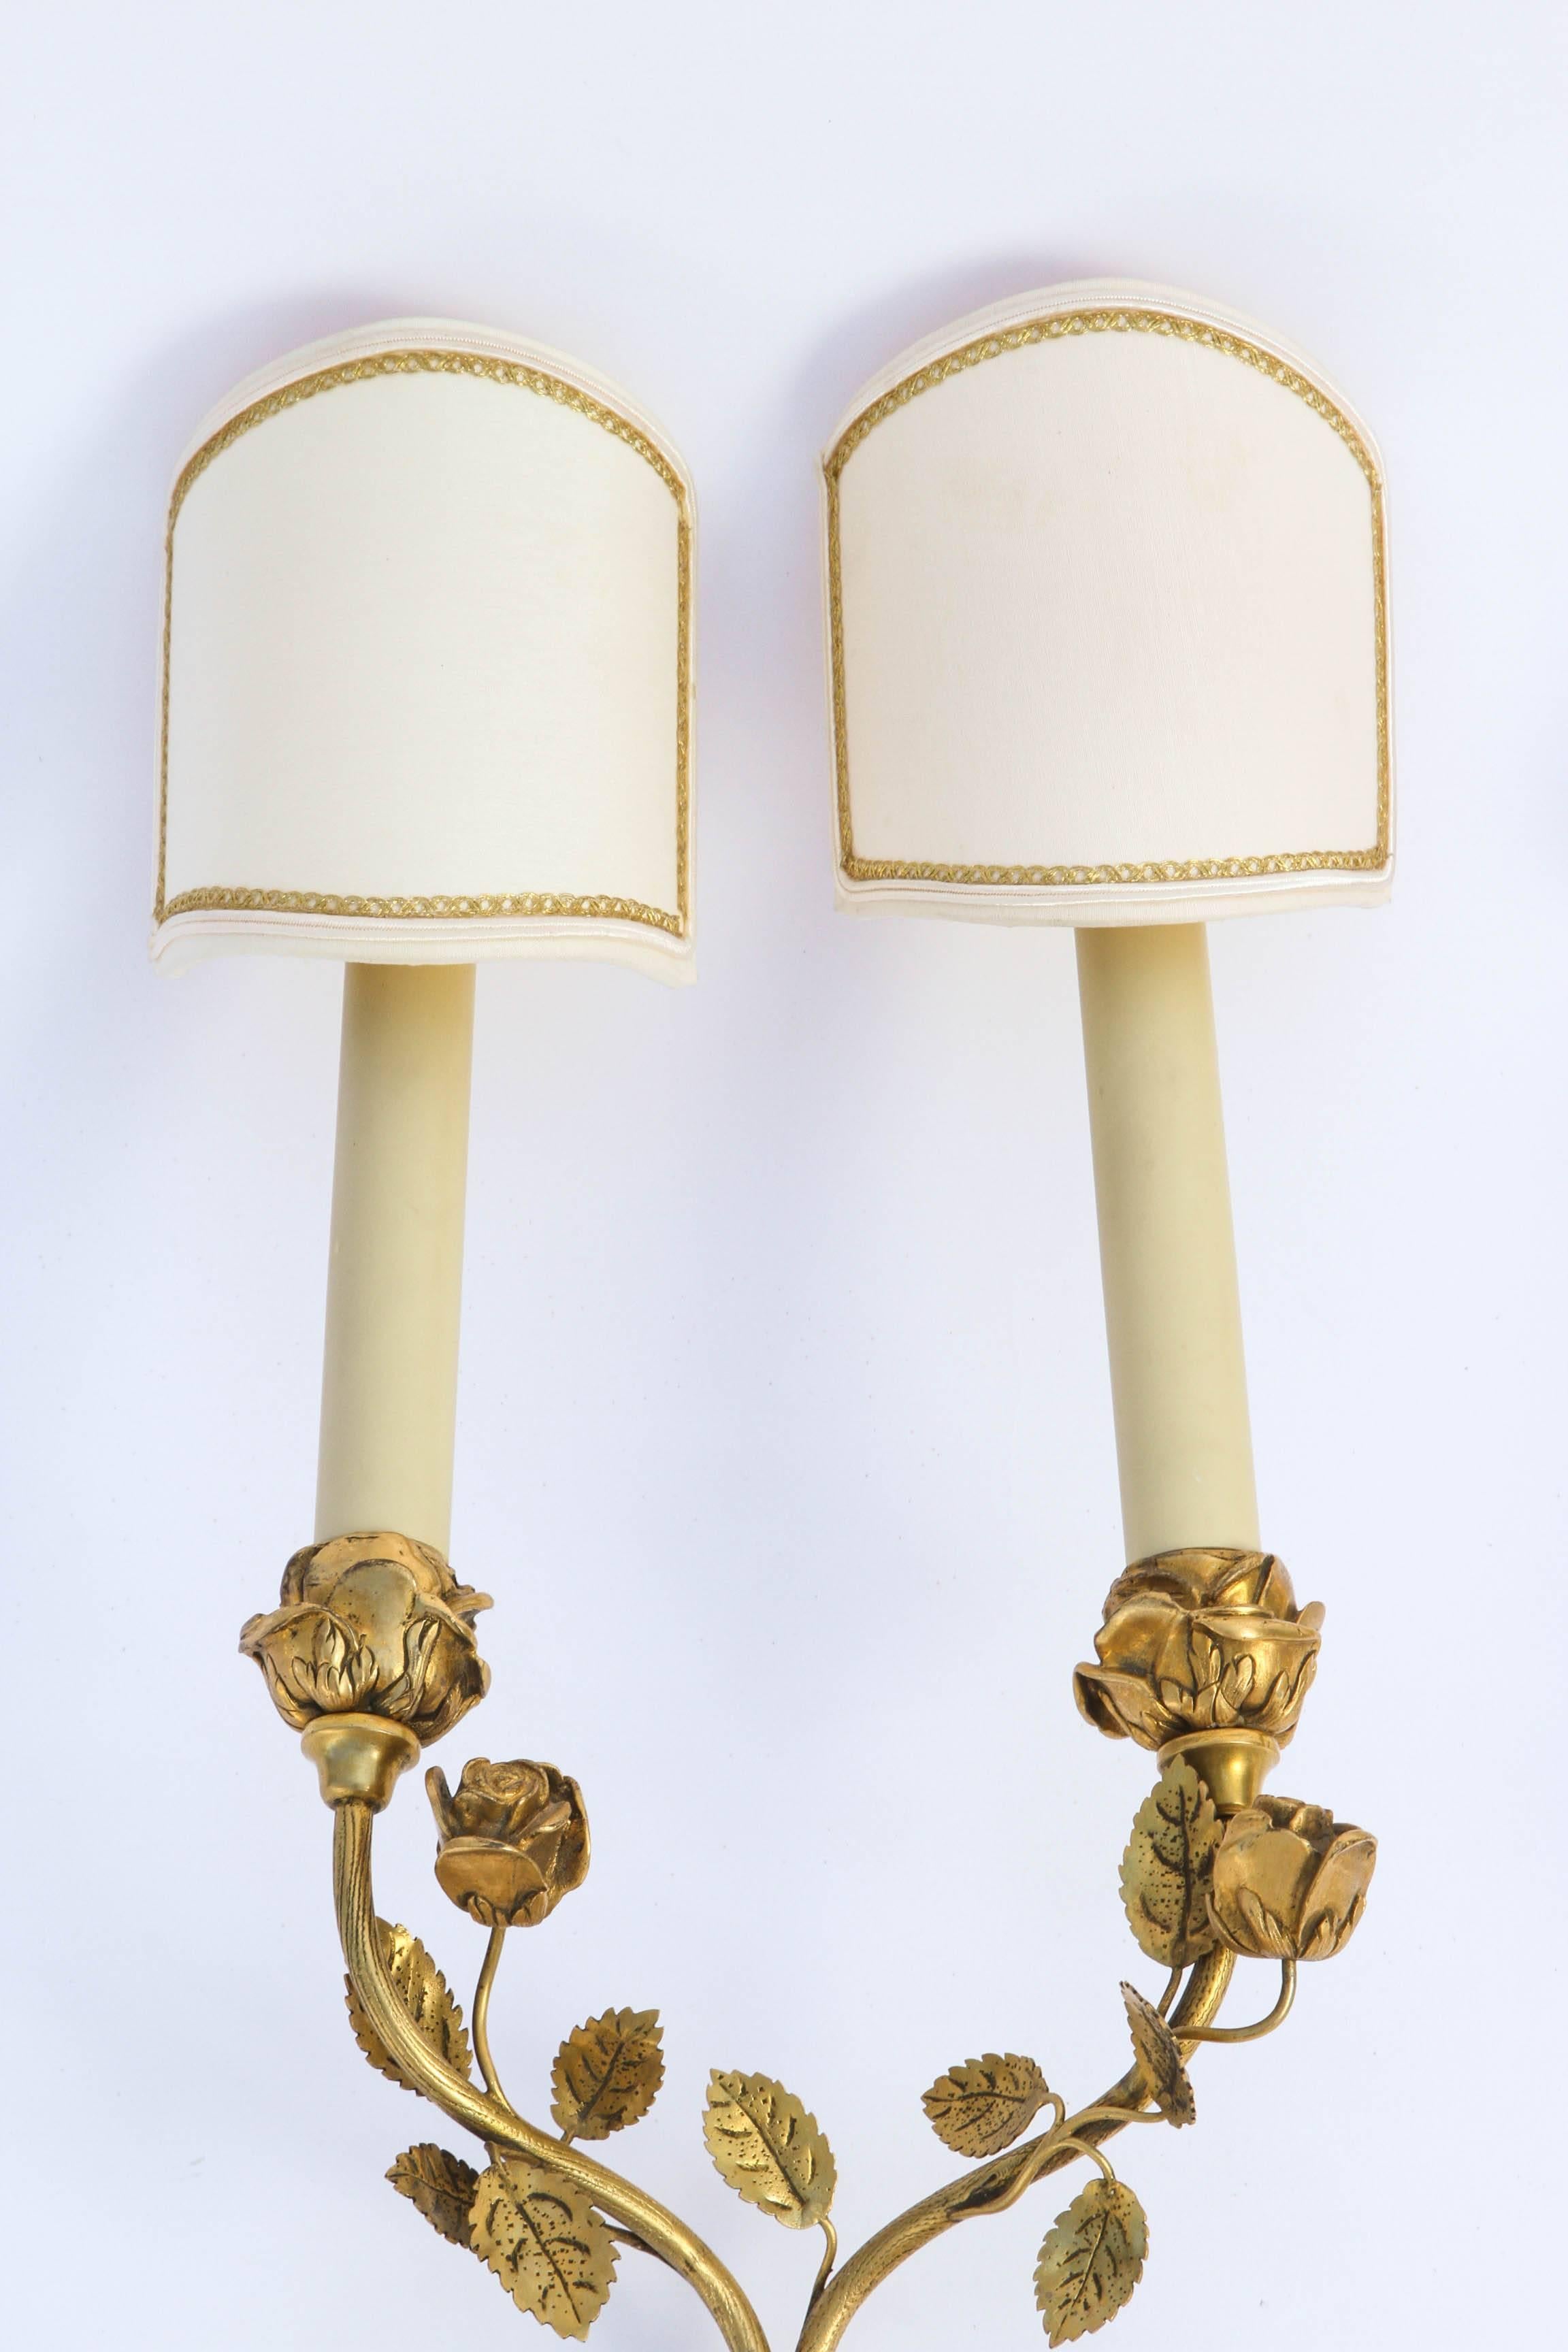 1900s Pair of French Doré Bronze Two-Arm Wall Sconces In Good Condition For Sale In Los Angeles, CA